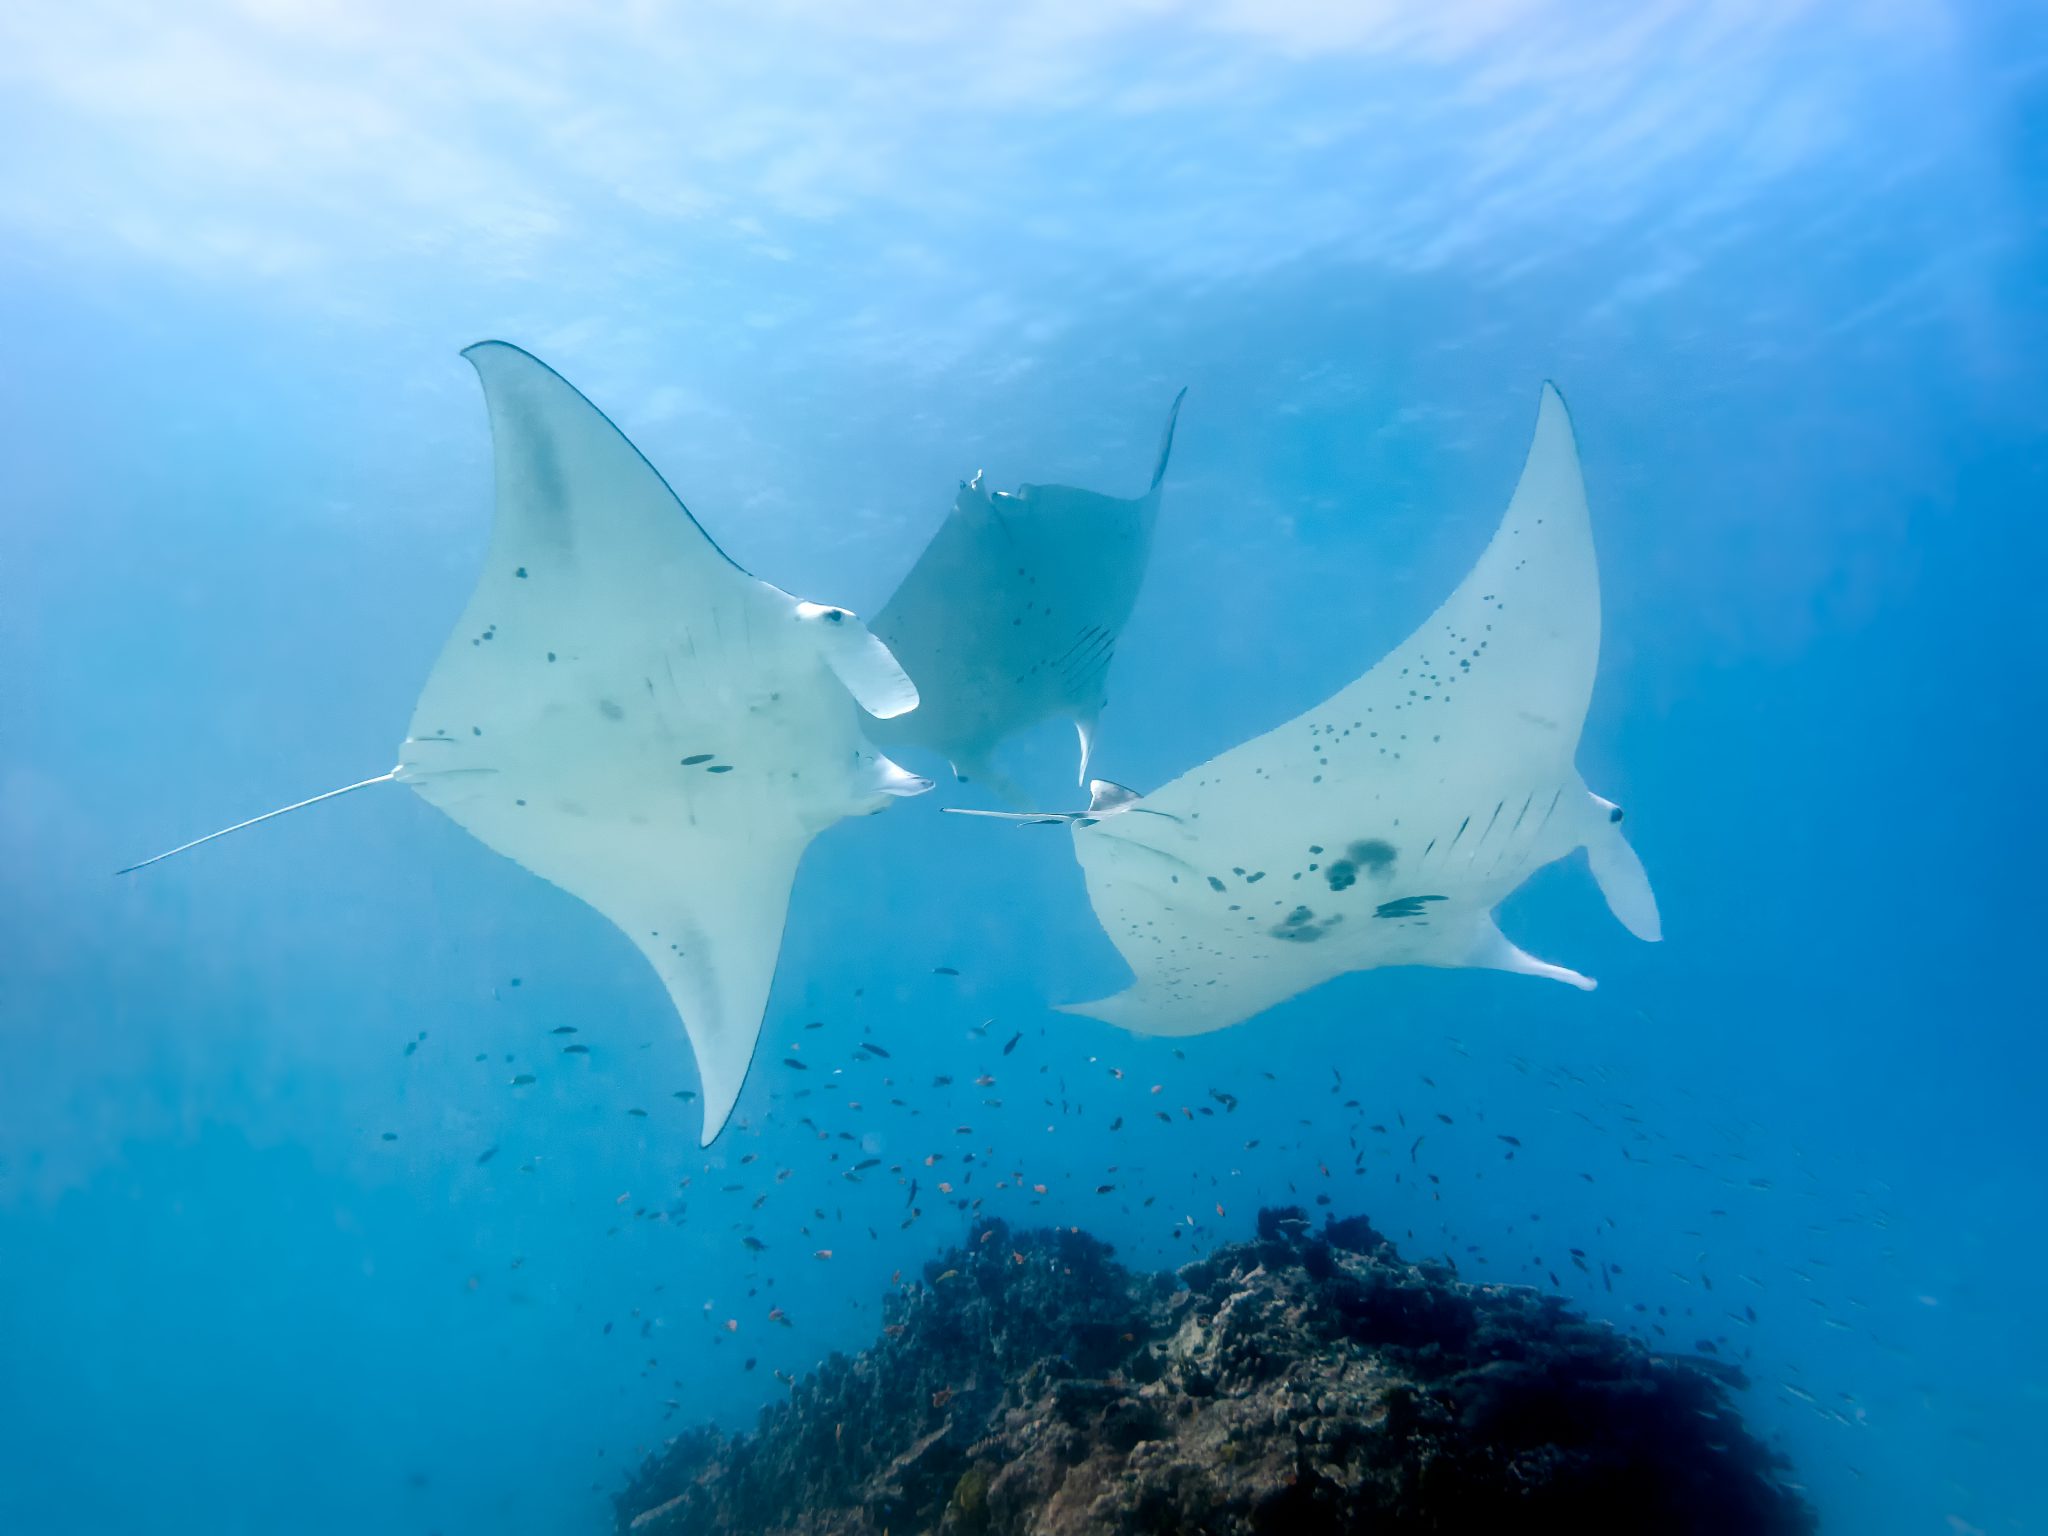 Three rays visiting a cleaning station at Lady Elliot Island in the Great Barrier Reef, Australia